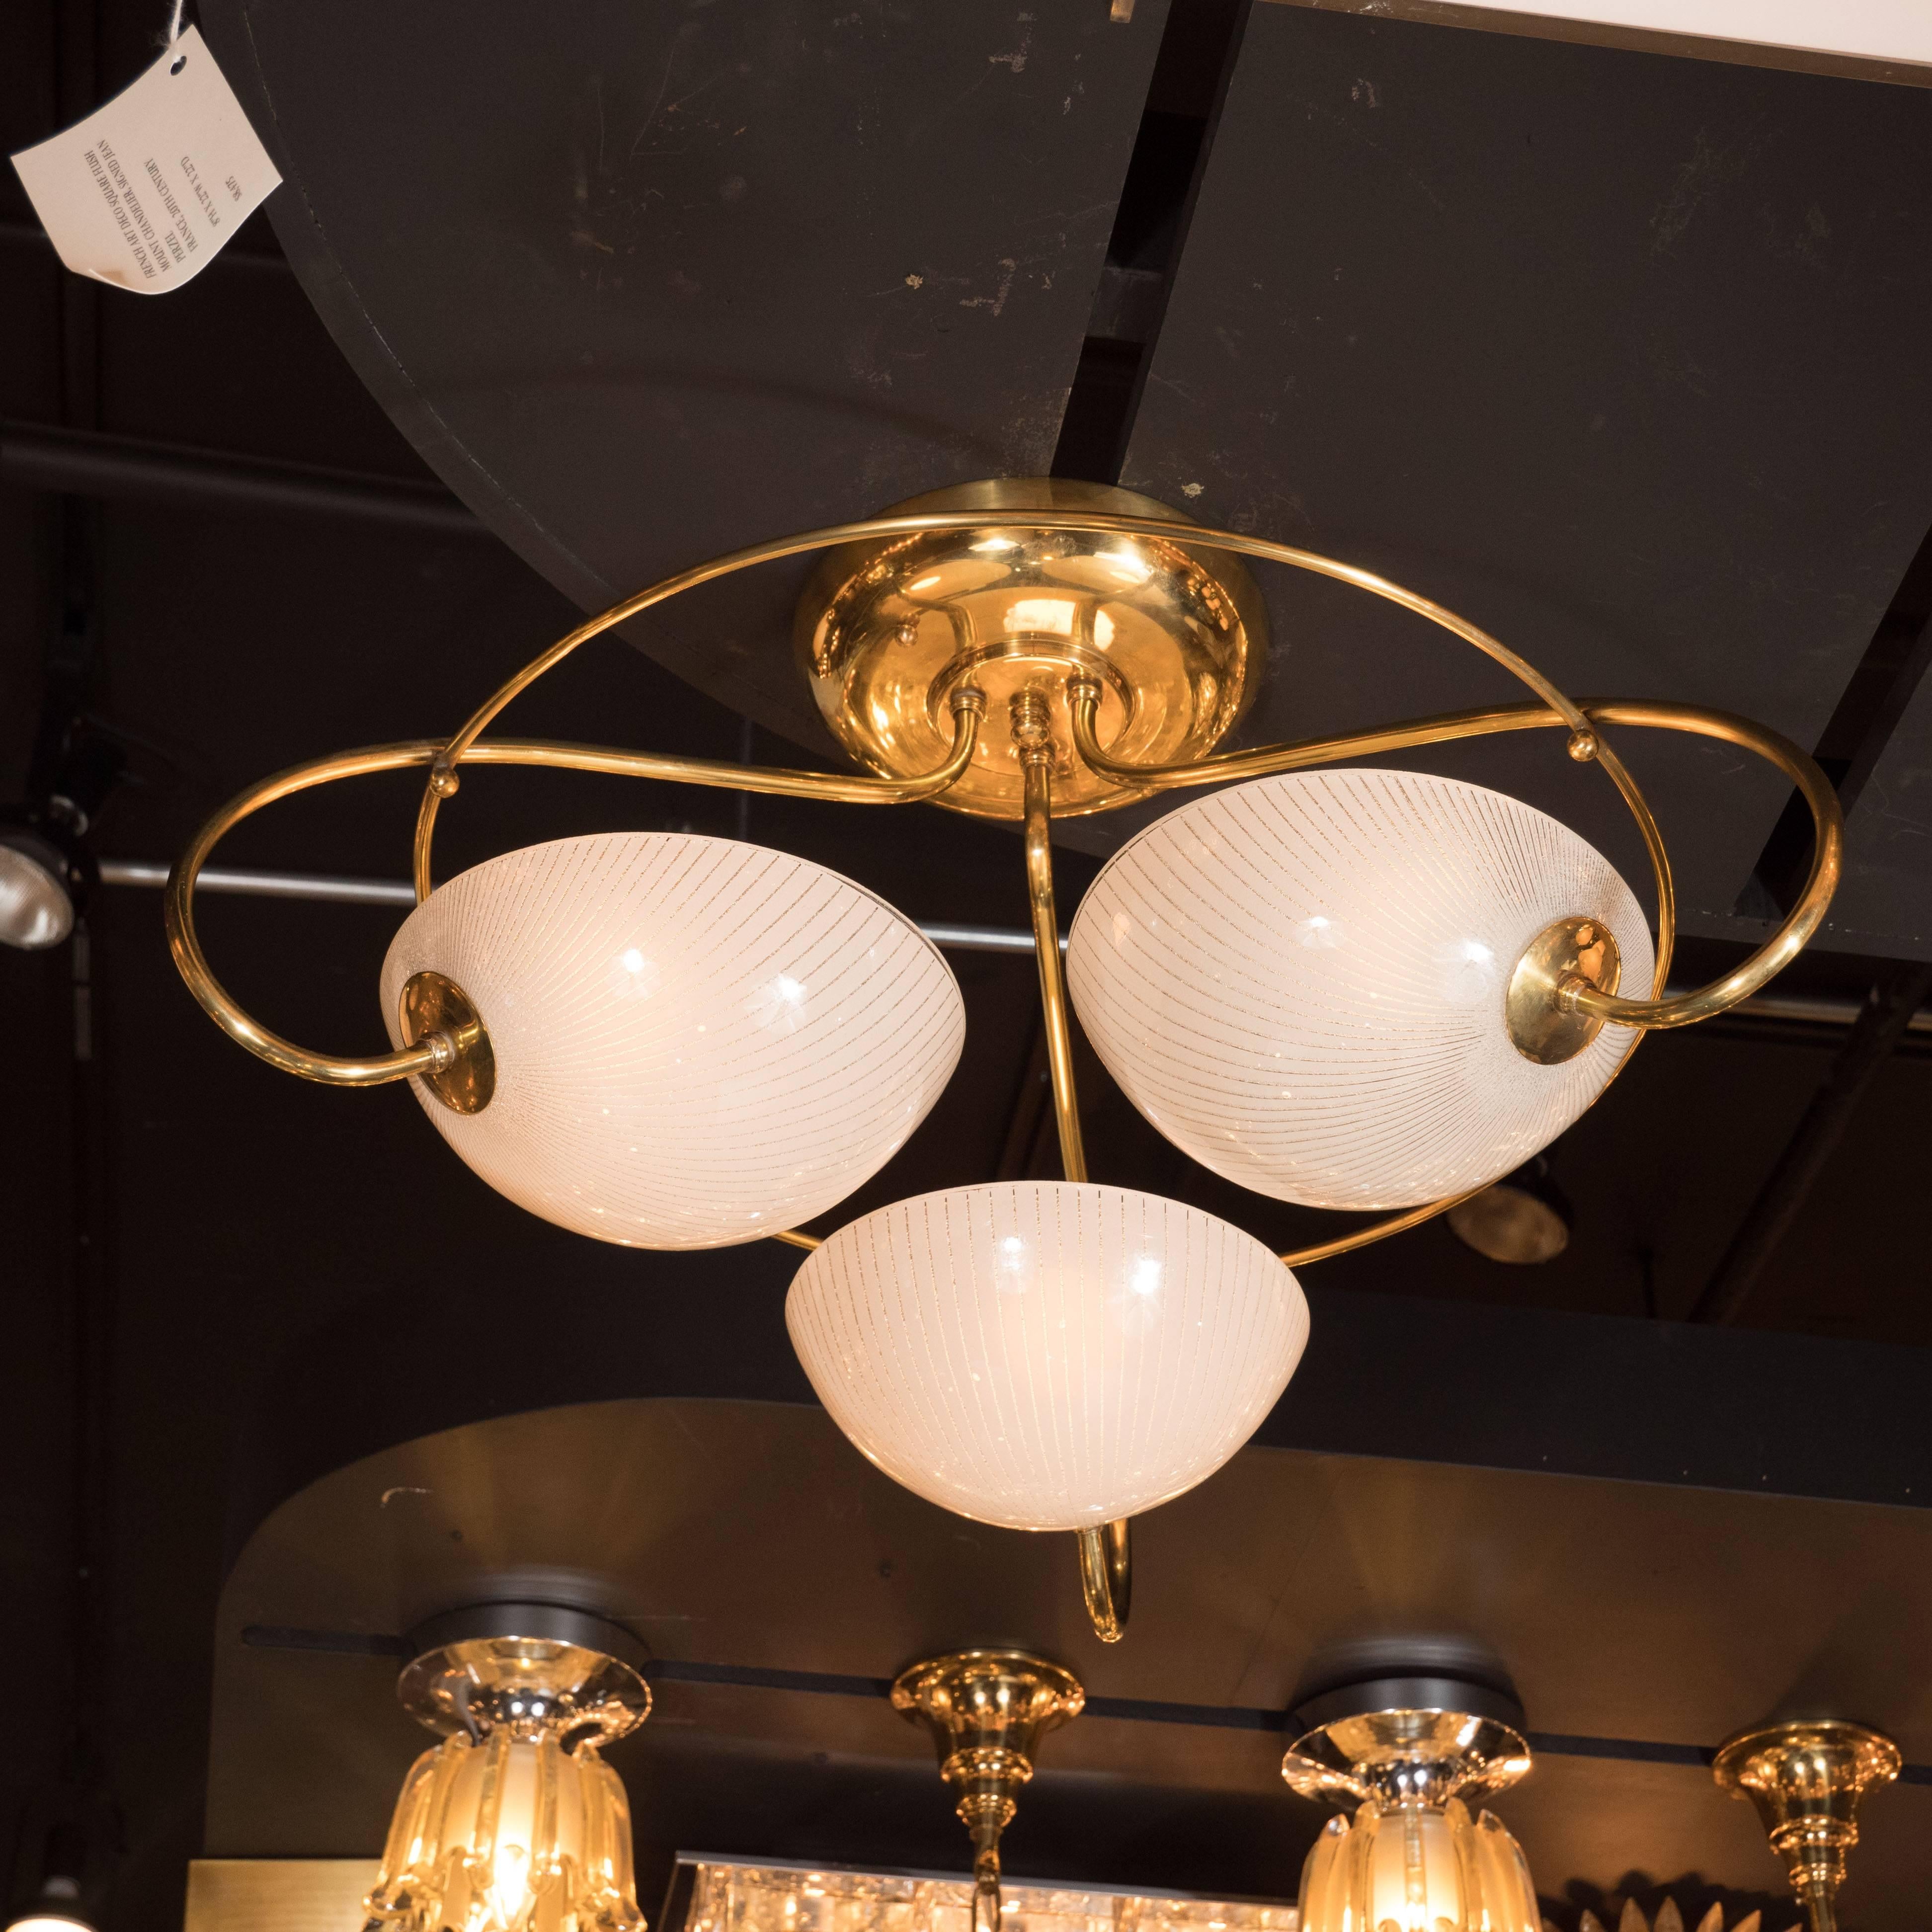 This gorgeous flush mount chandelier created in the United States, circa 1960. Its sinuous curves, and luxurious materials make it an exceptional example of the time and place. Three curving arms descend from a circular canopy, encircled by a